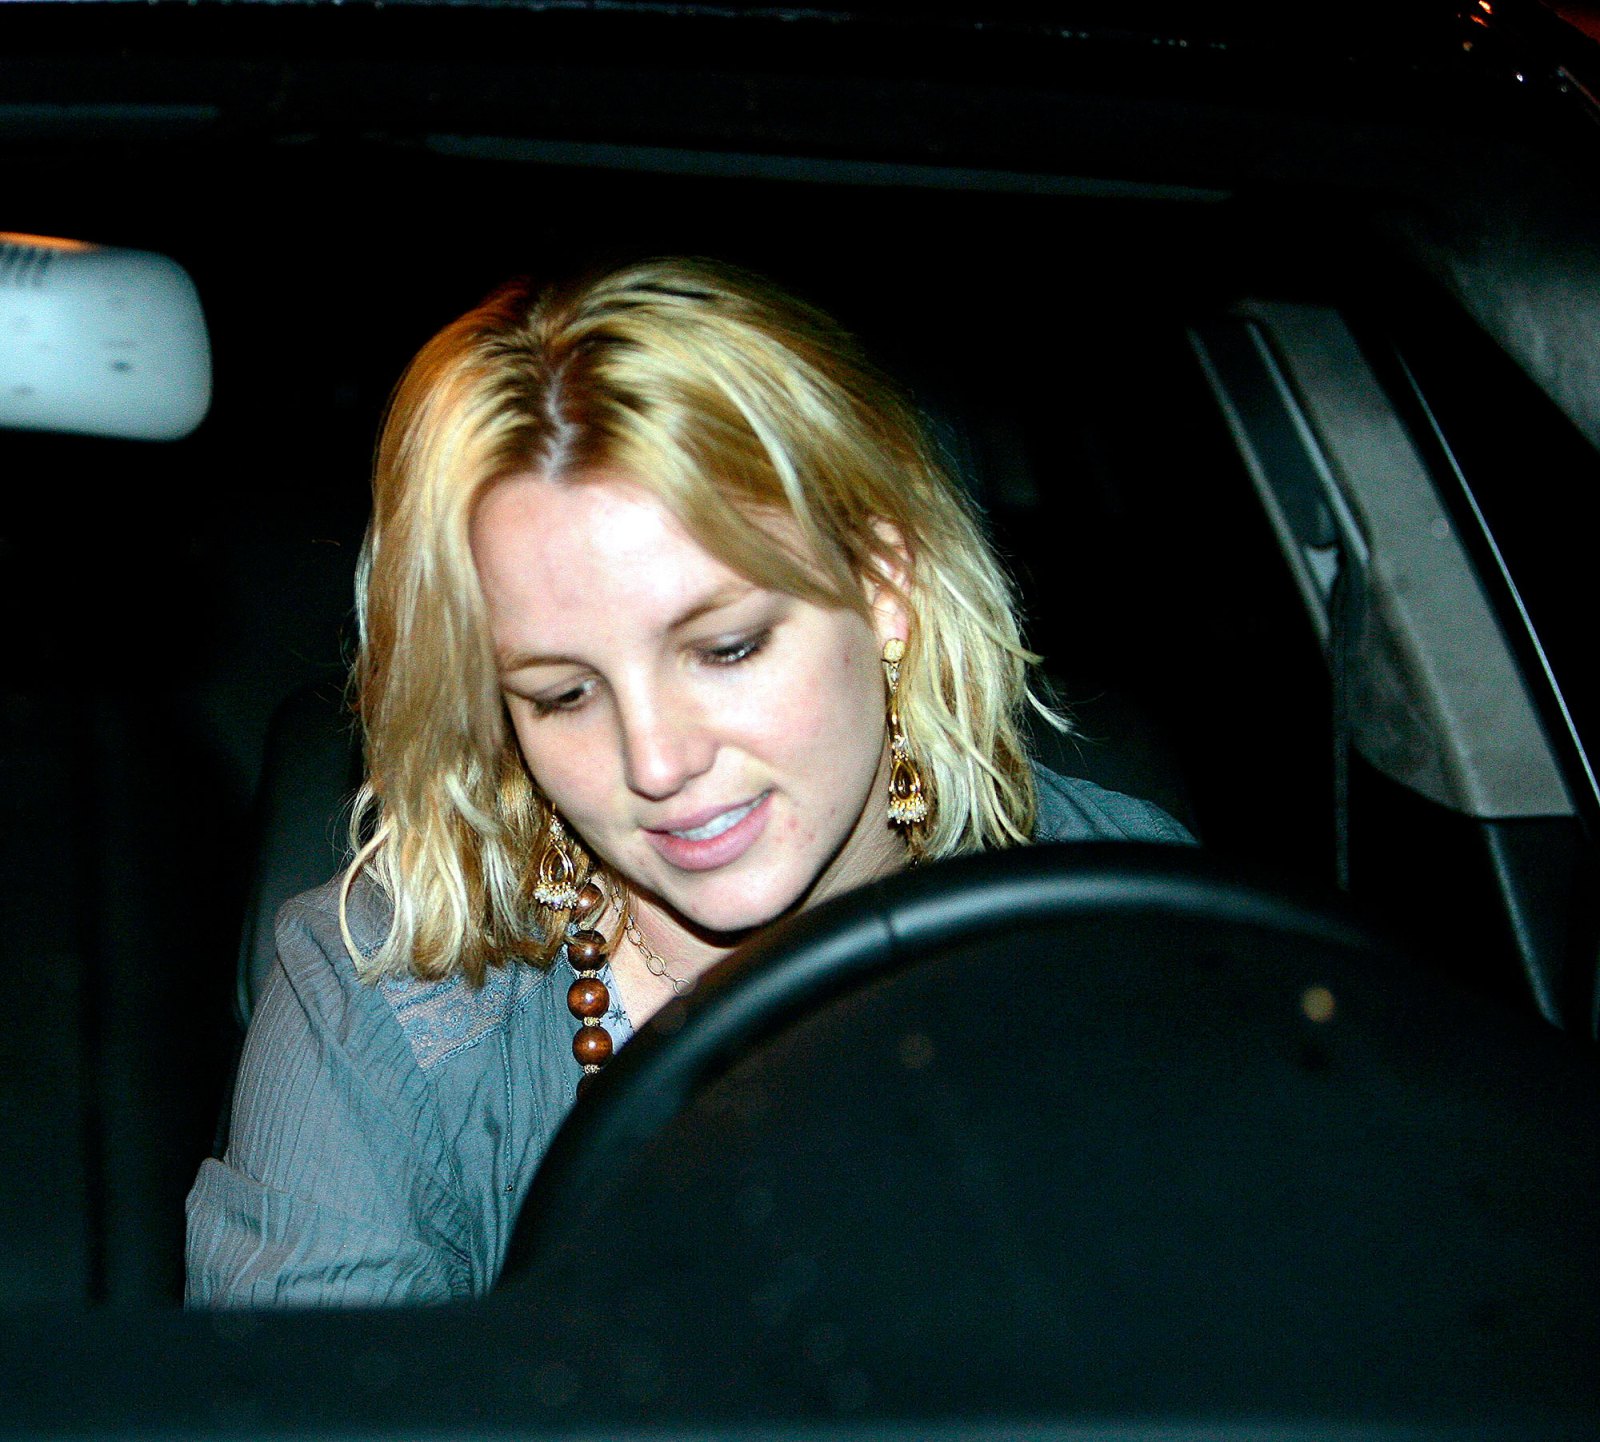 Britney Spears’ Ups and Downs gallery